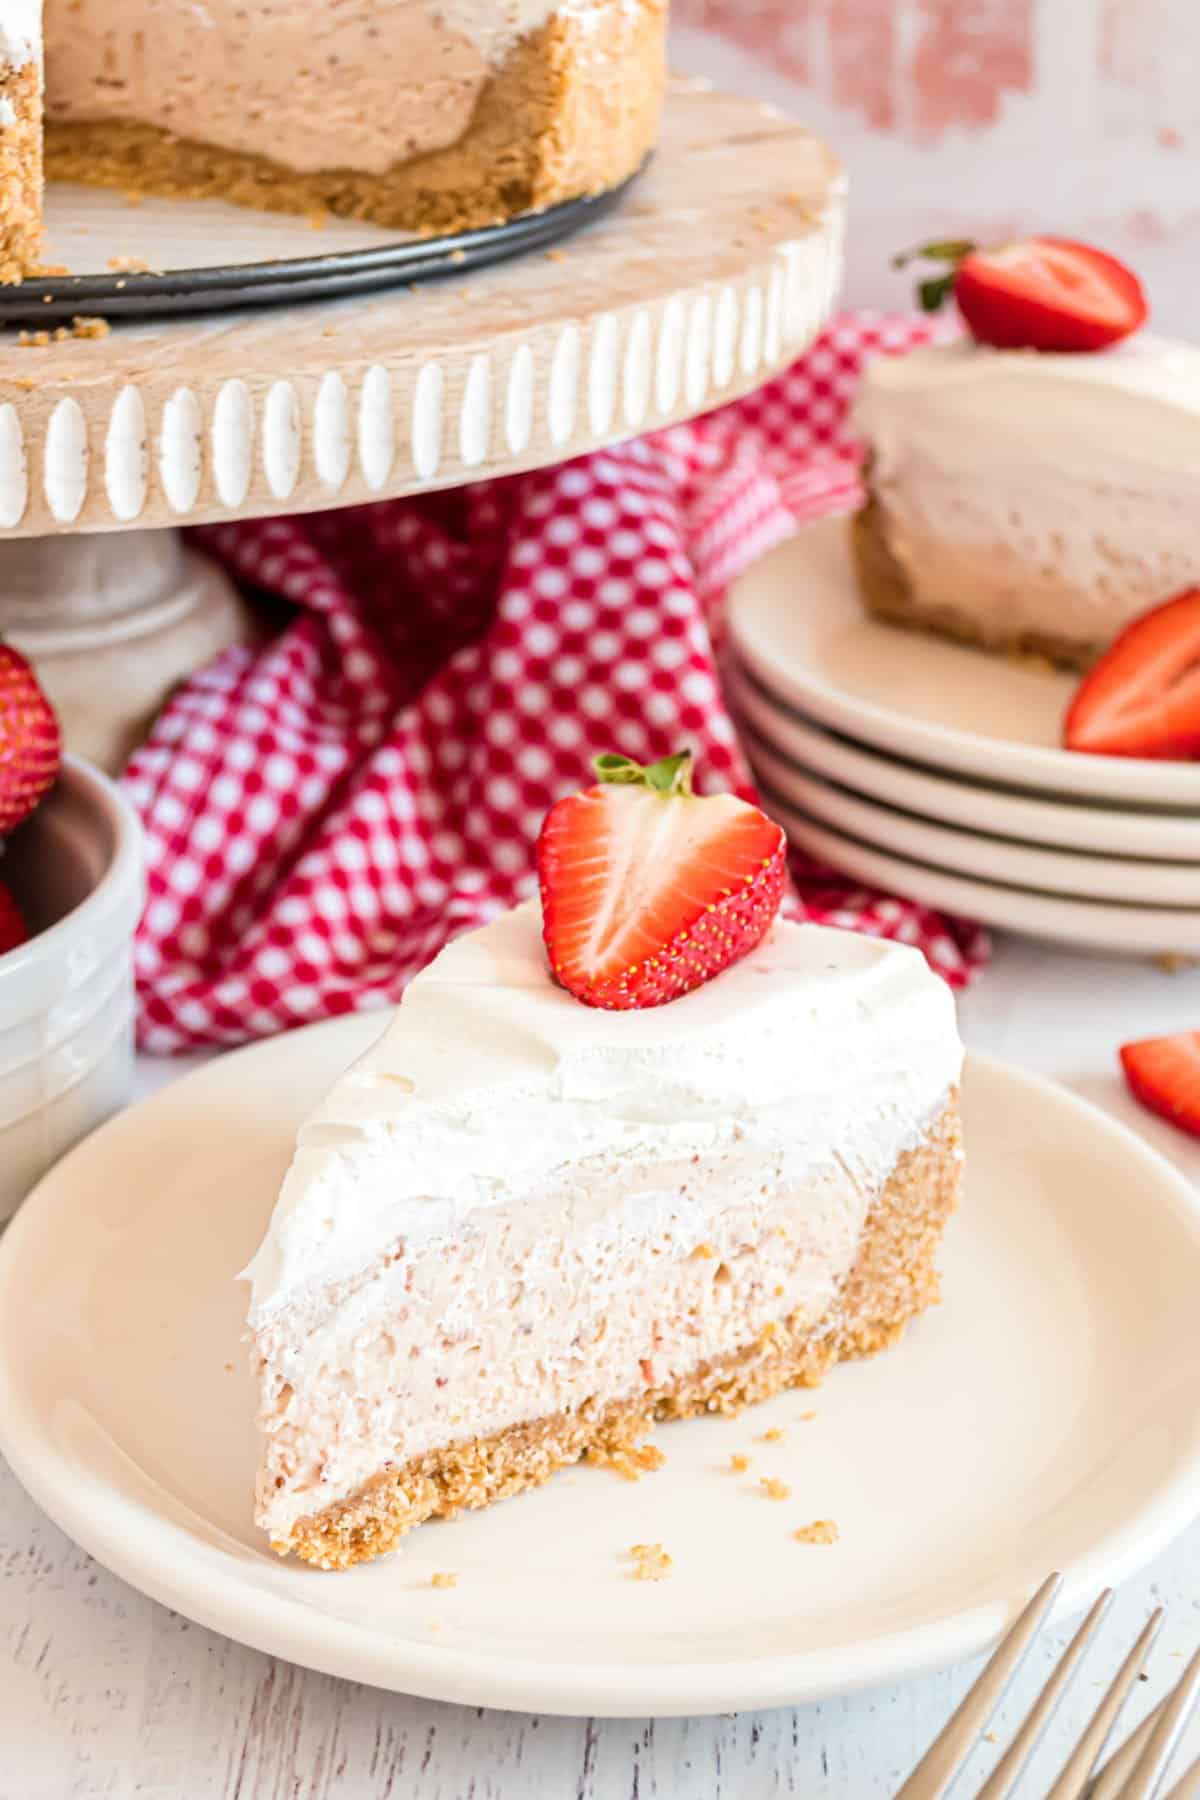 Slice of strawberry cheesecake with whipped creamand strawberry on top.